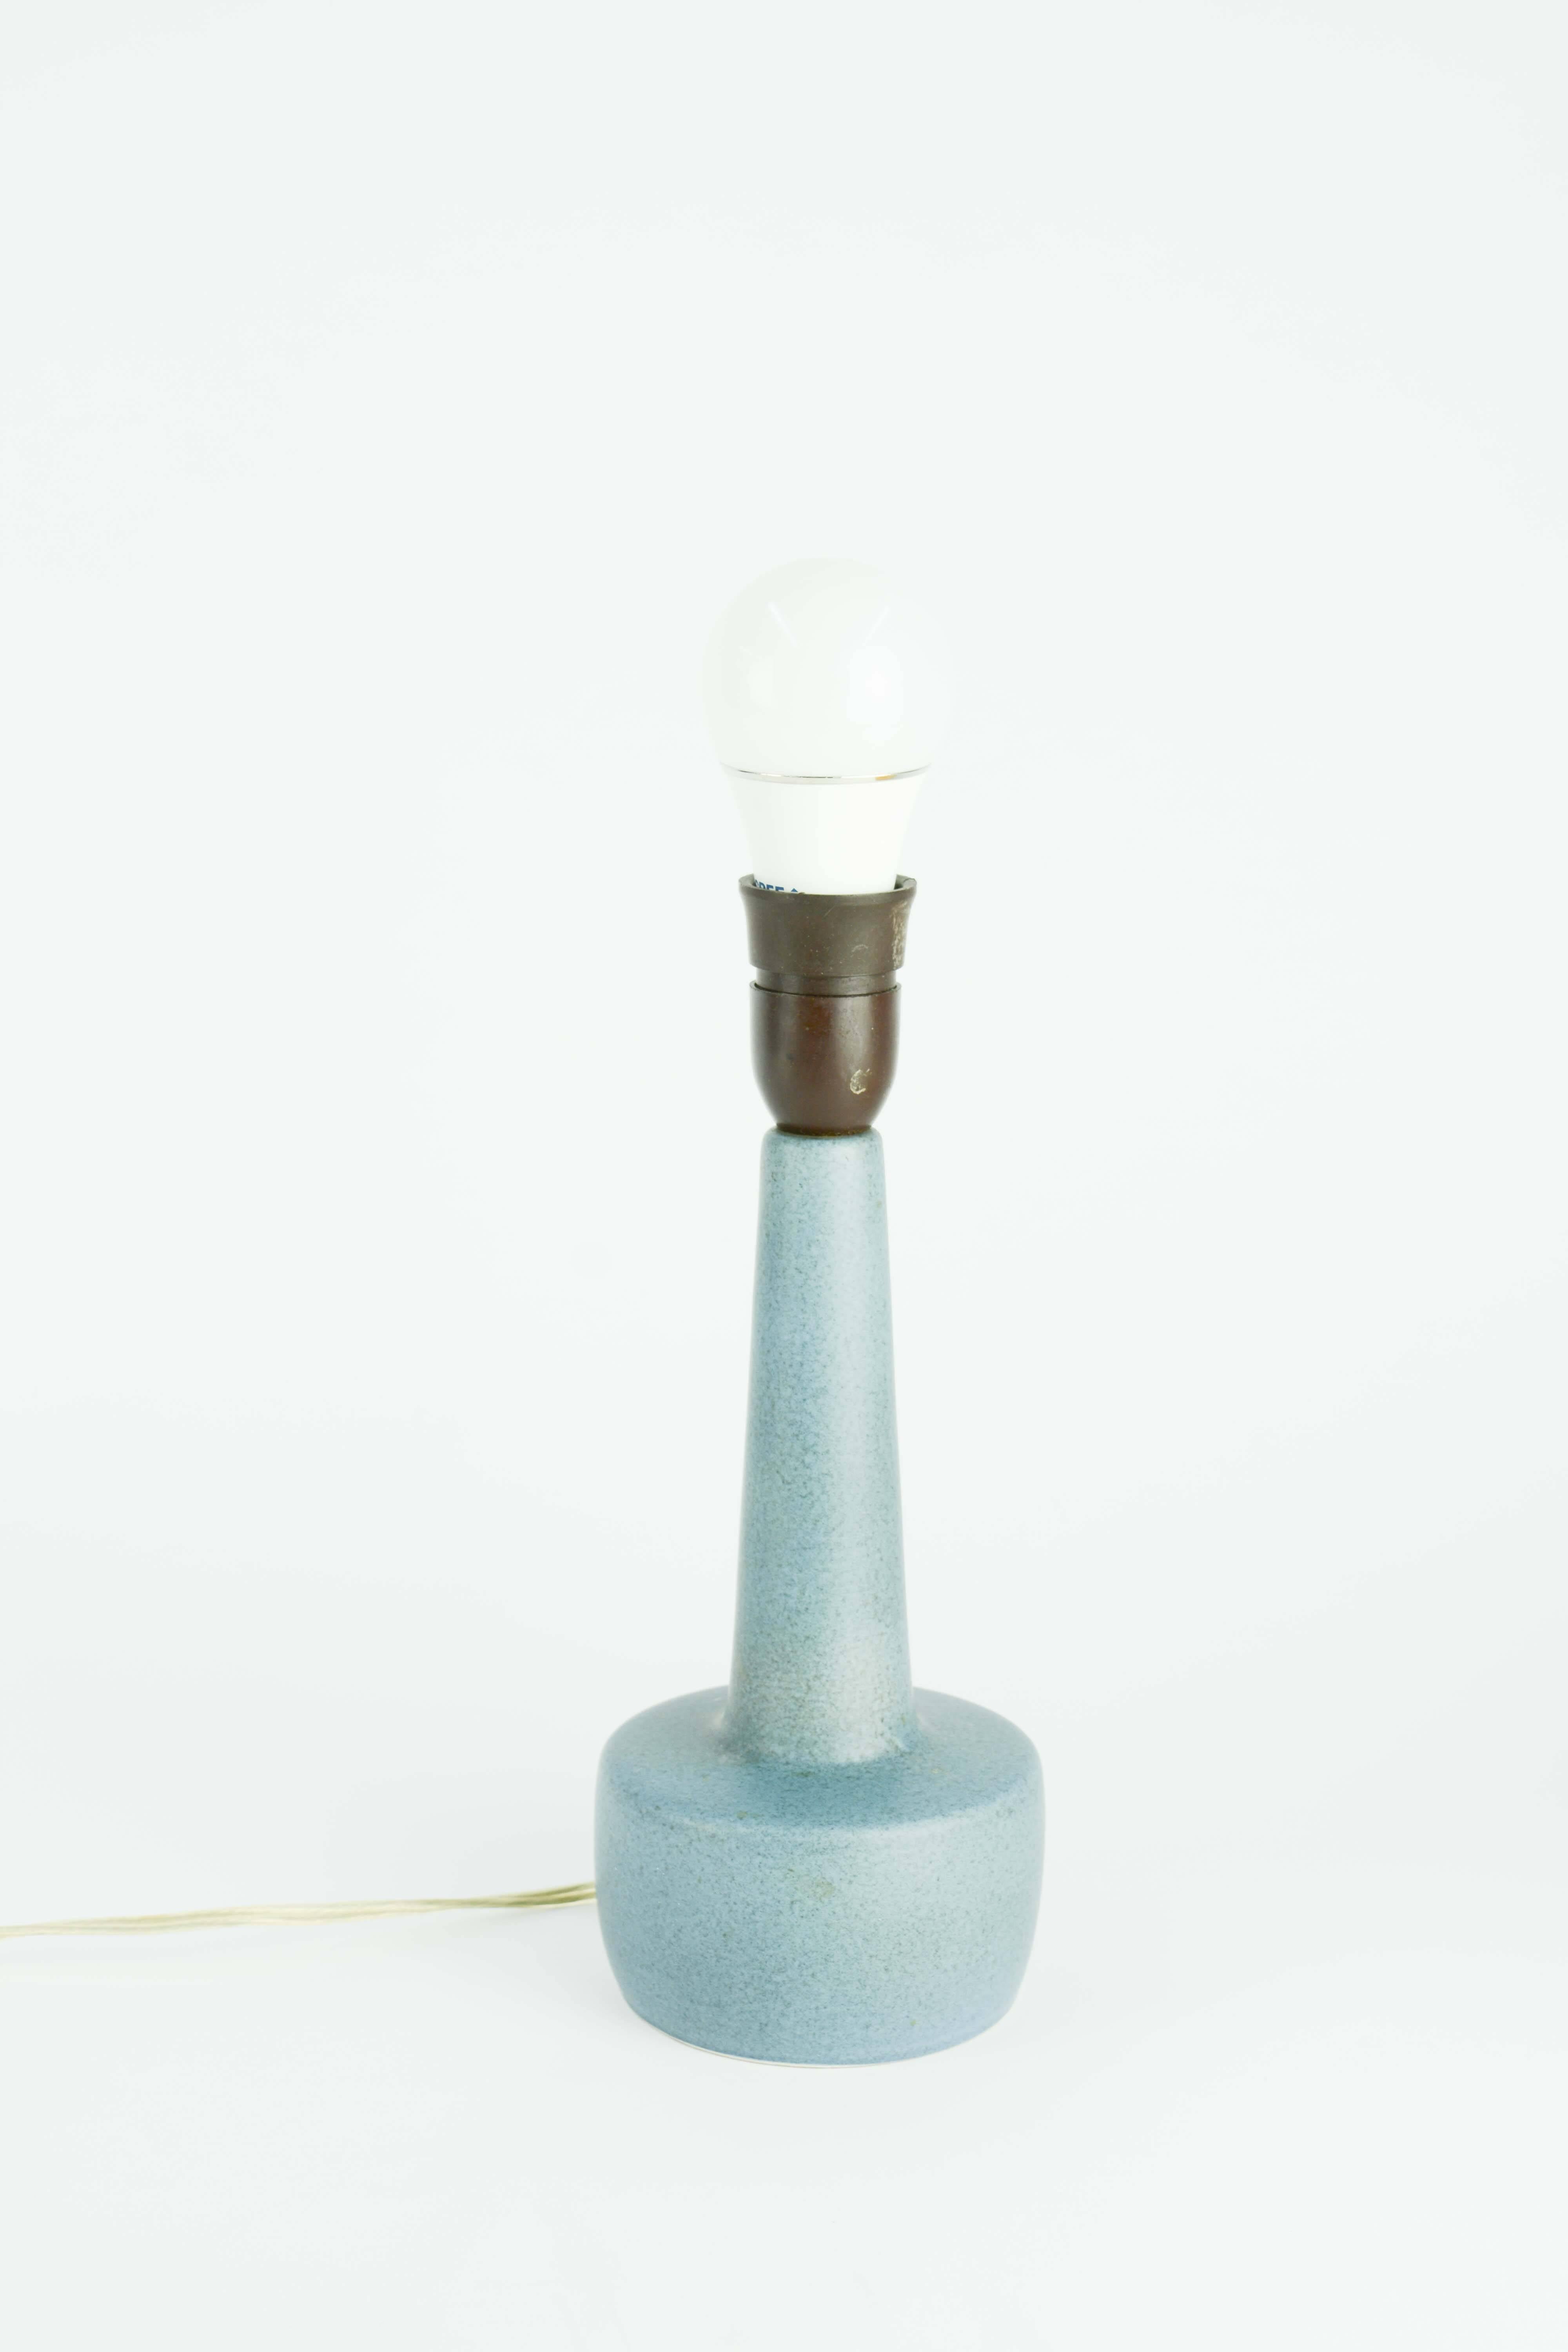 Model 972 by Soholm of Denmark in a Caribbean blue glaze. The lamp is marked RA and 972. It is sold without the shade.